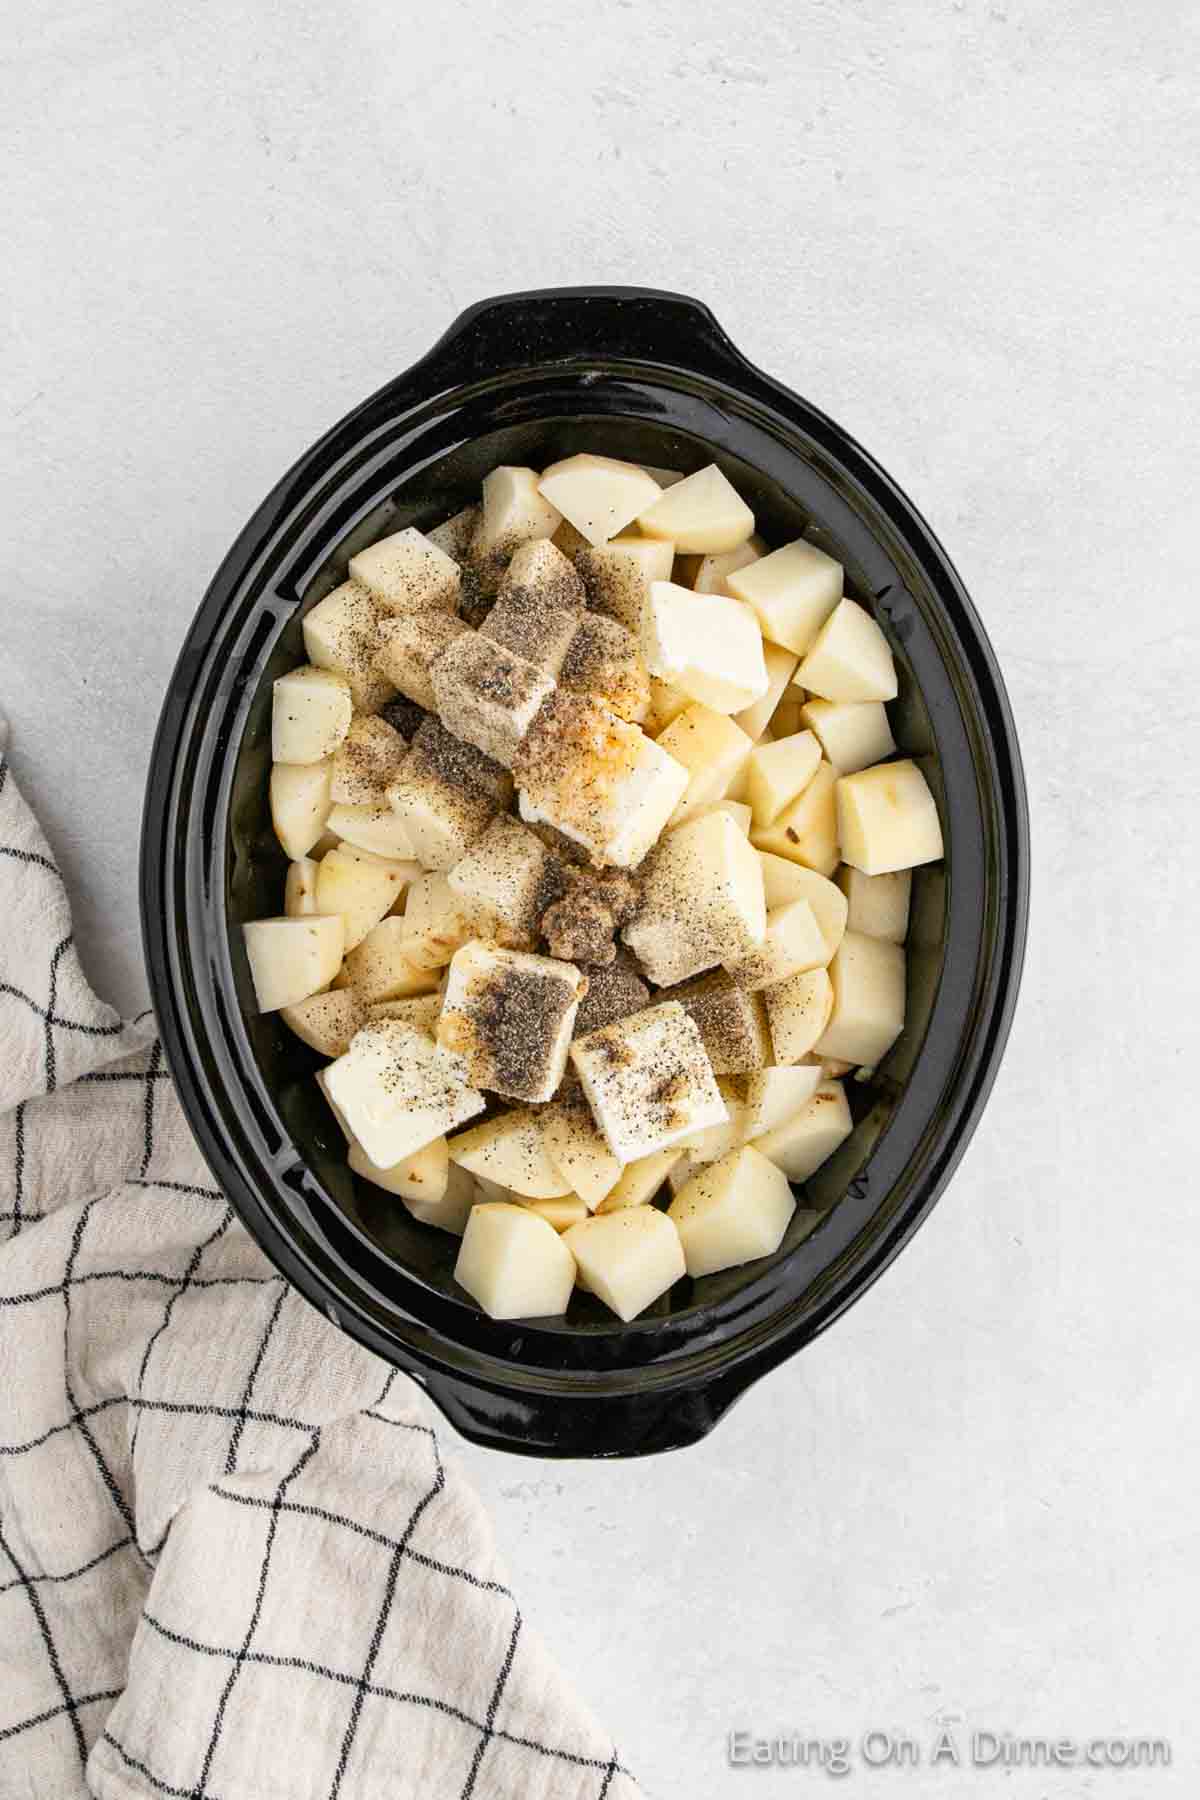 Placing cut potatoes in the slow cooker and topping with butter and seasoning